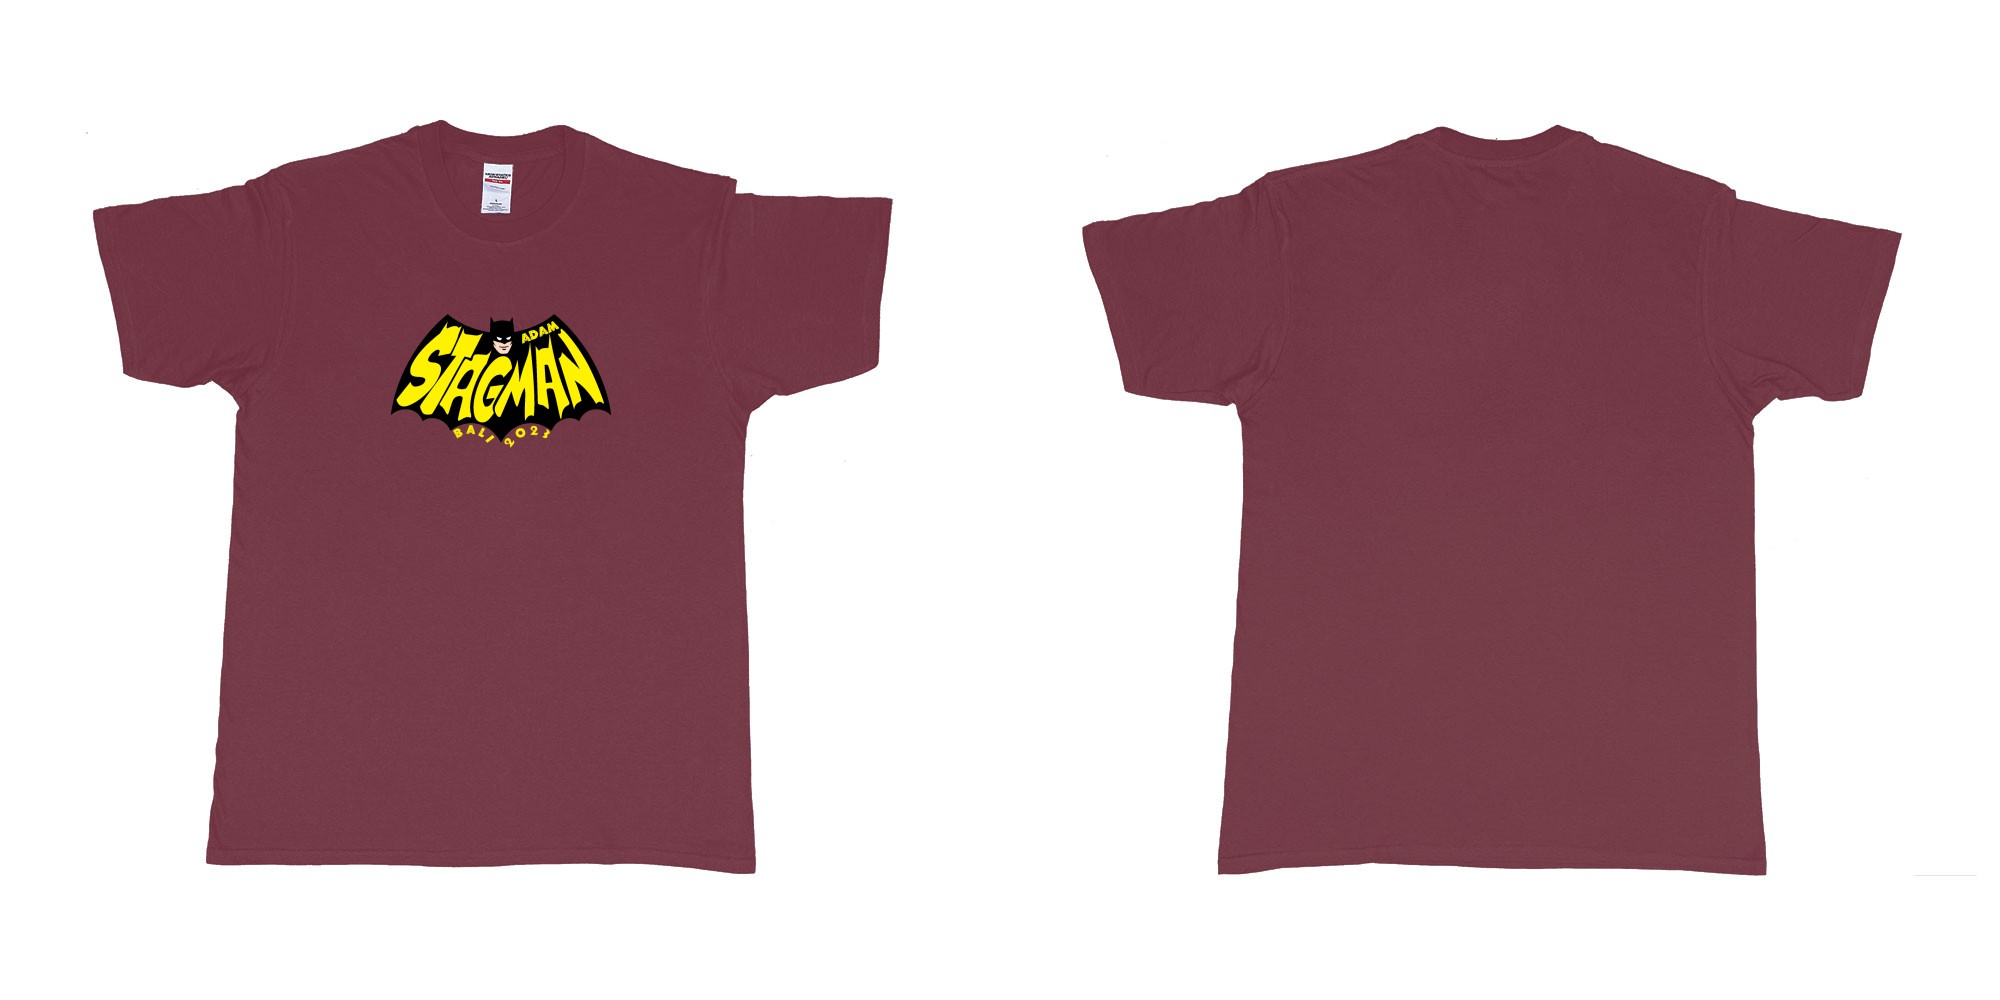 Custom tshirt design Batman StagMan Old School in fabric color marron choice your own text made in Bali by The Pirate Way